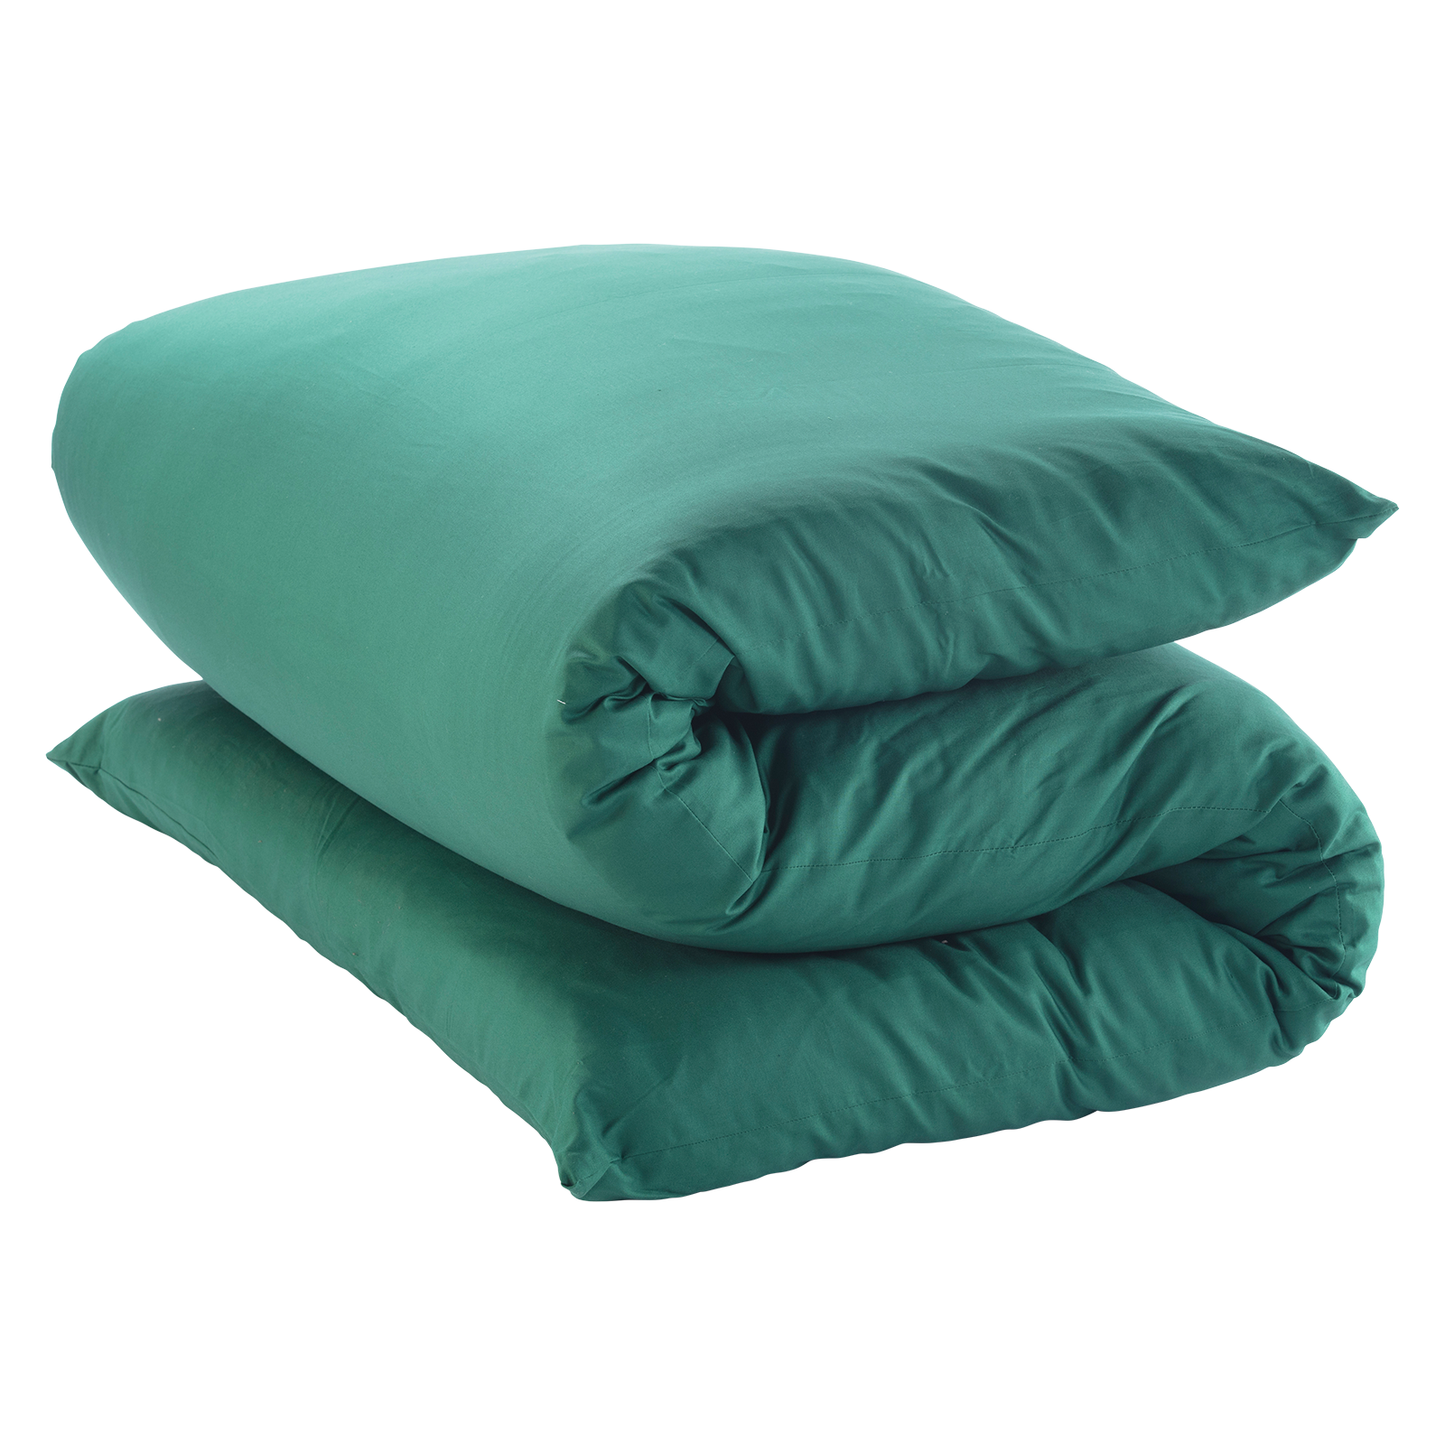 Shikifuton Kelly Green Removable COVER ONLY